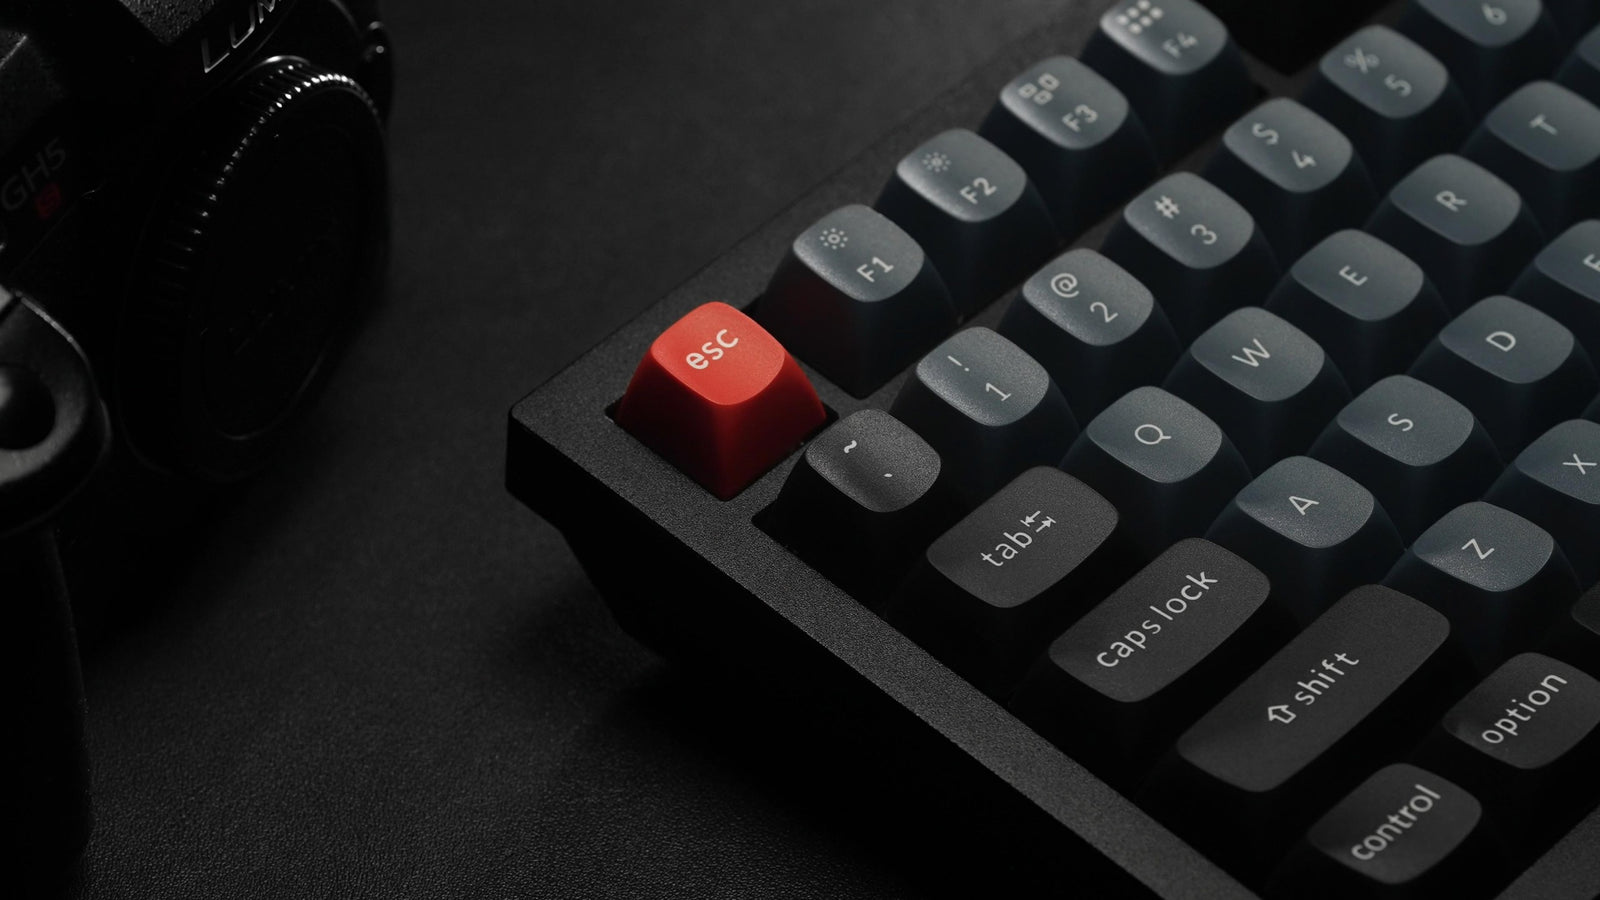 Keychron Keyboard Article Review - April 2022